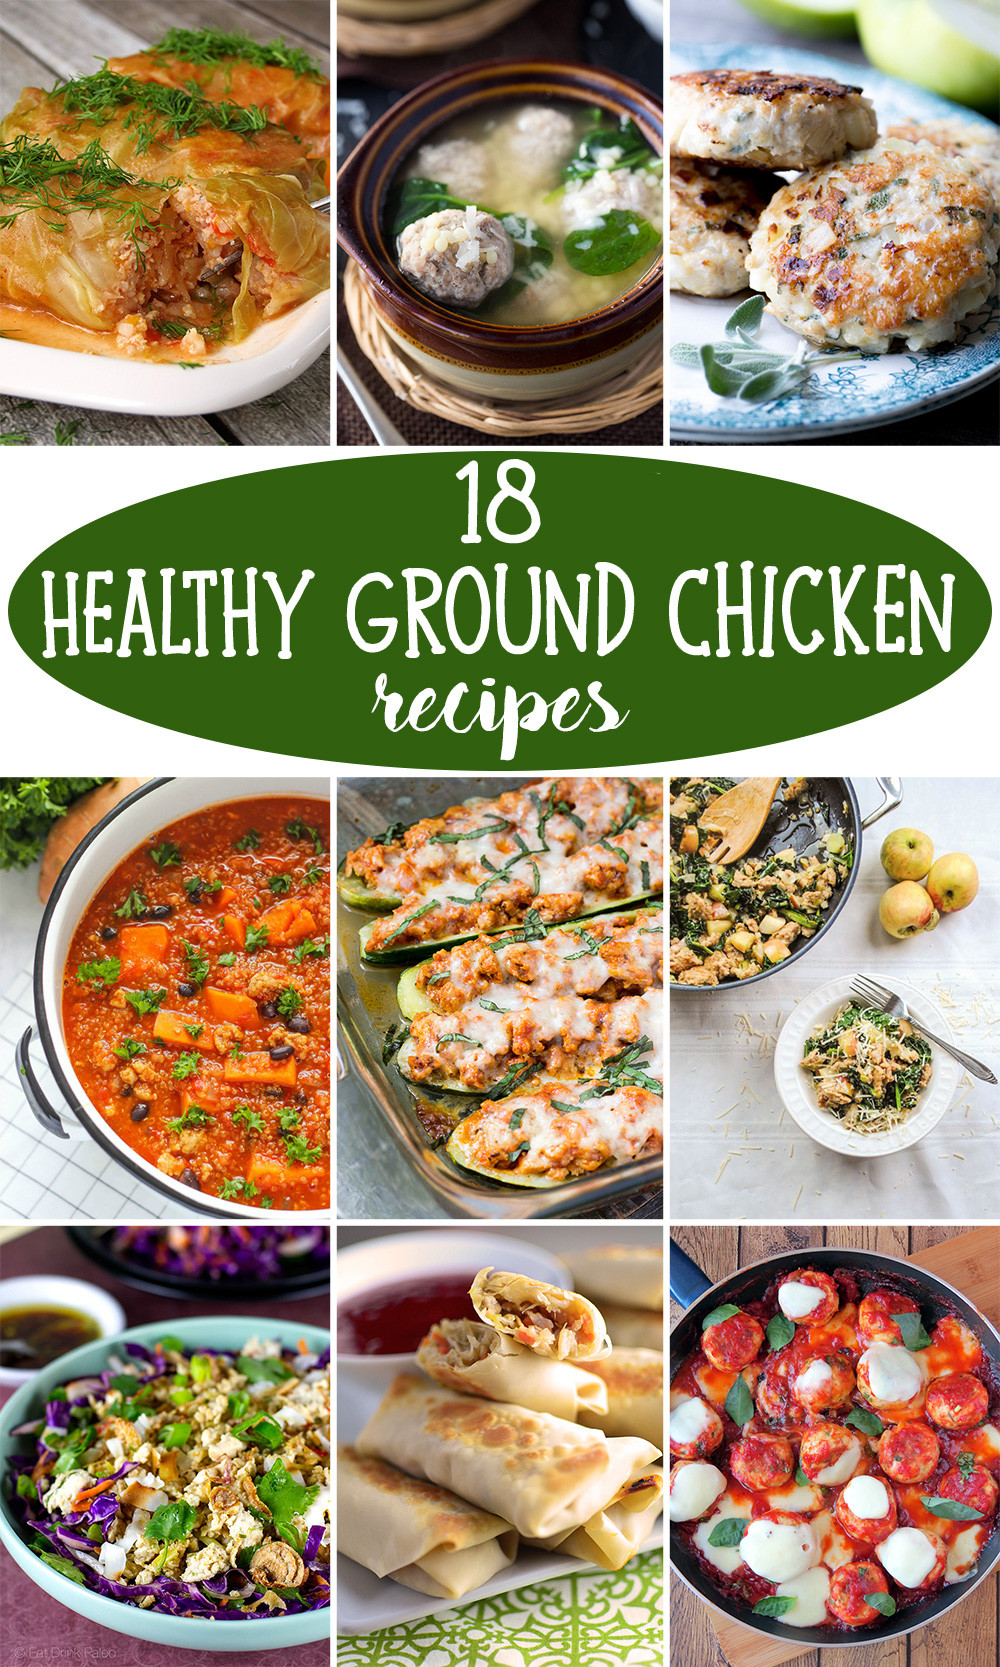 Healthy Ground Chicken Recipes
 18 Healthy Ground Chicken Recipes That ll Make You Feel Great